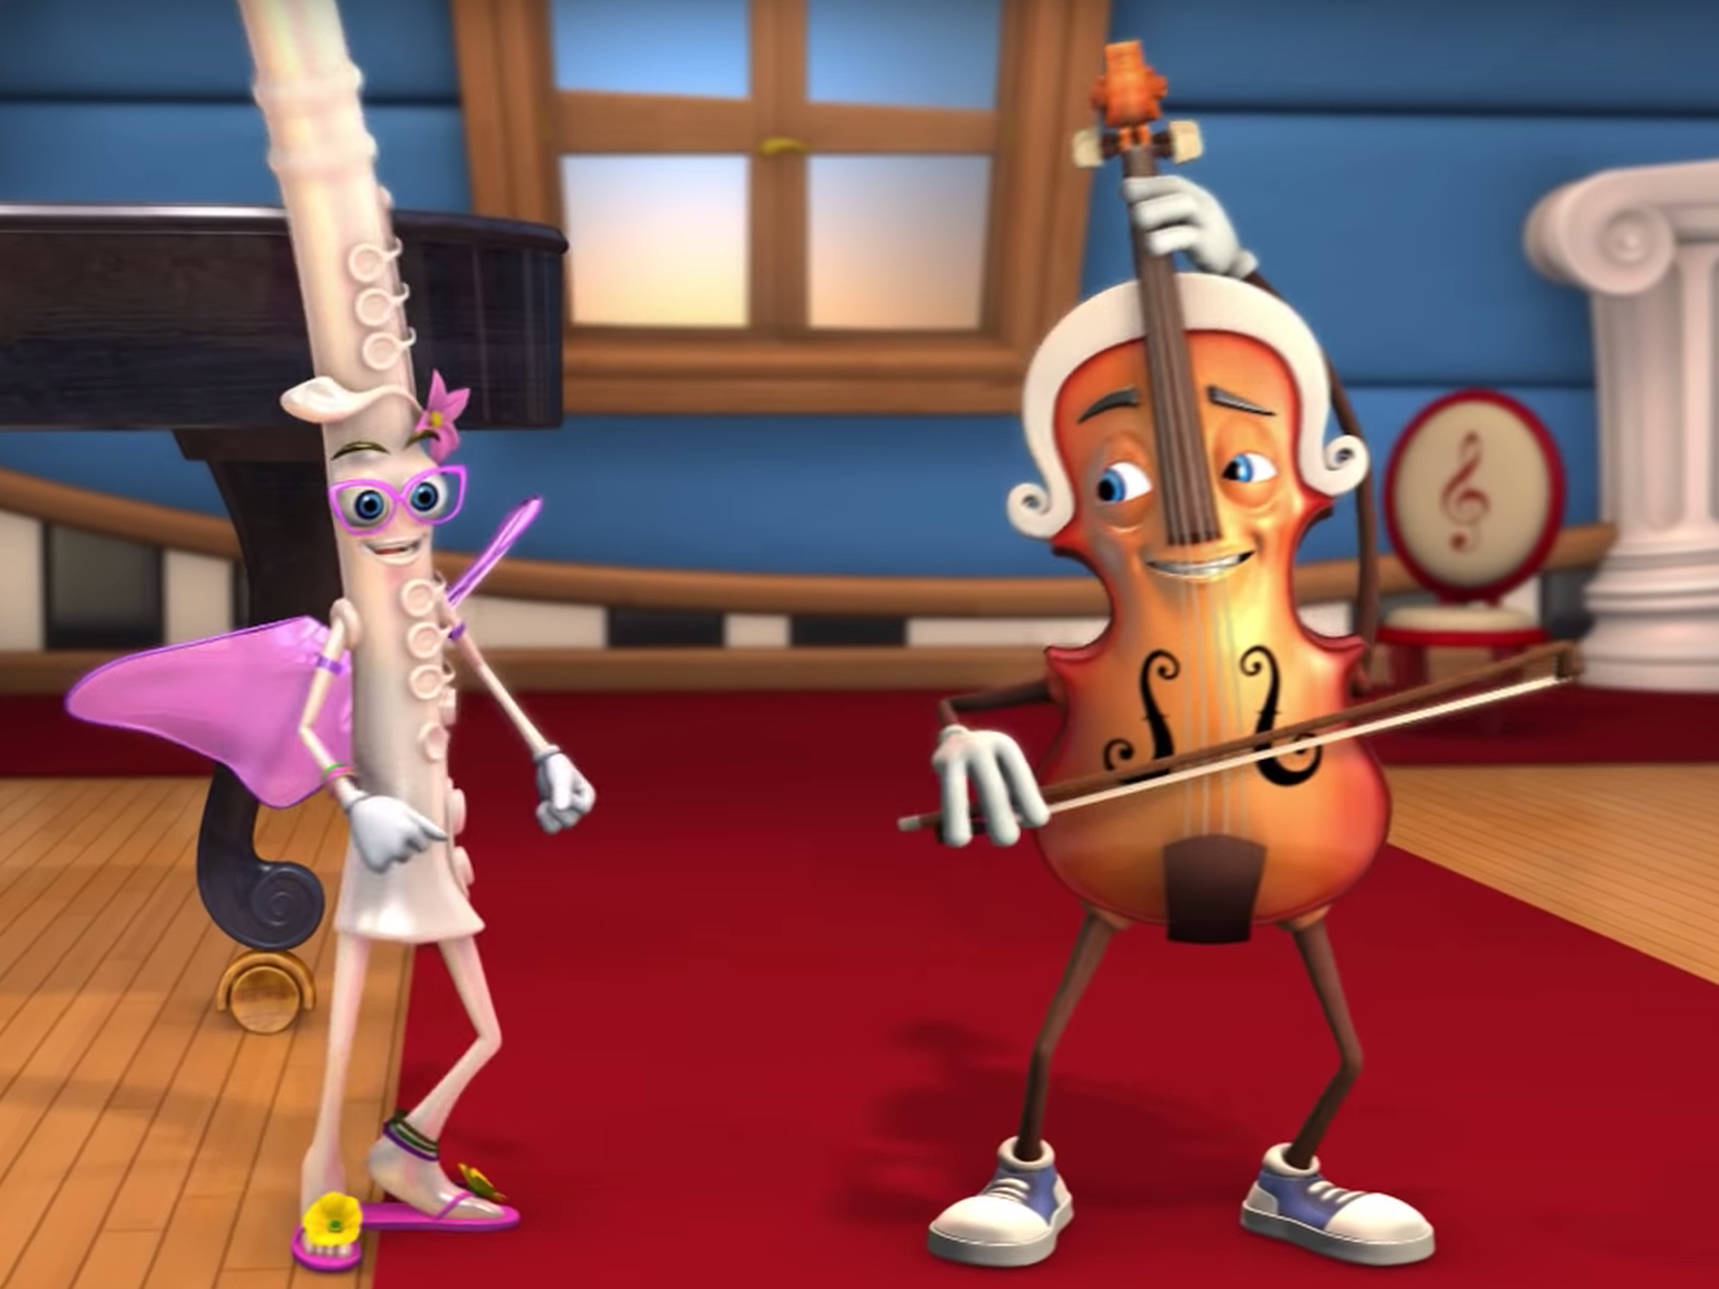 Adorable animated instruments play together in kids classical music show -  Classic FM